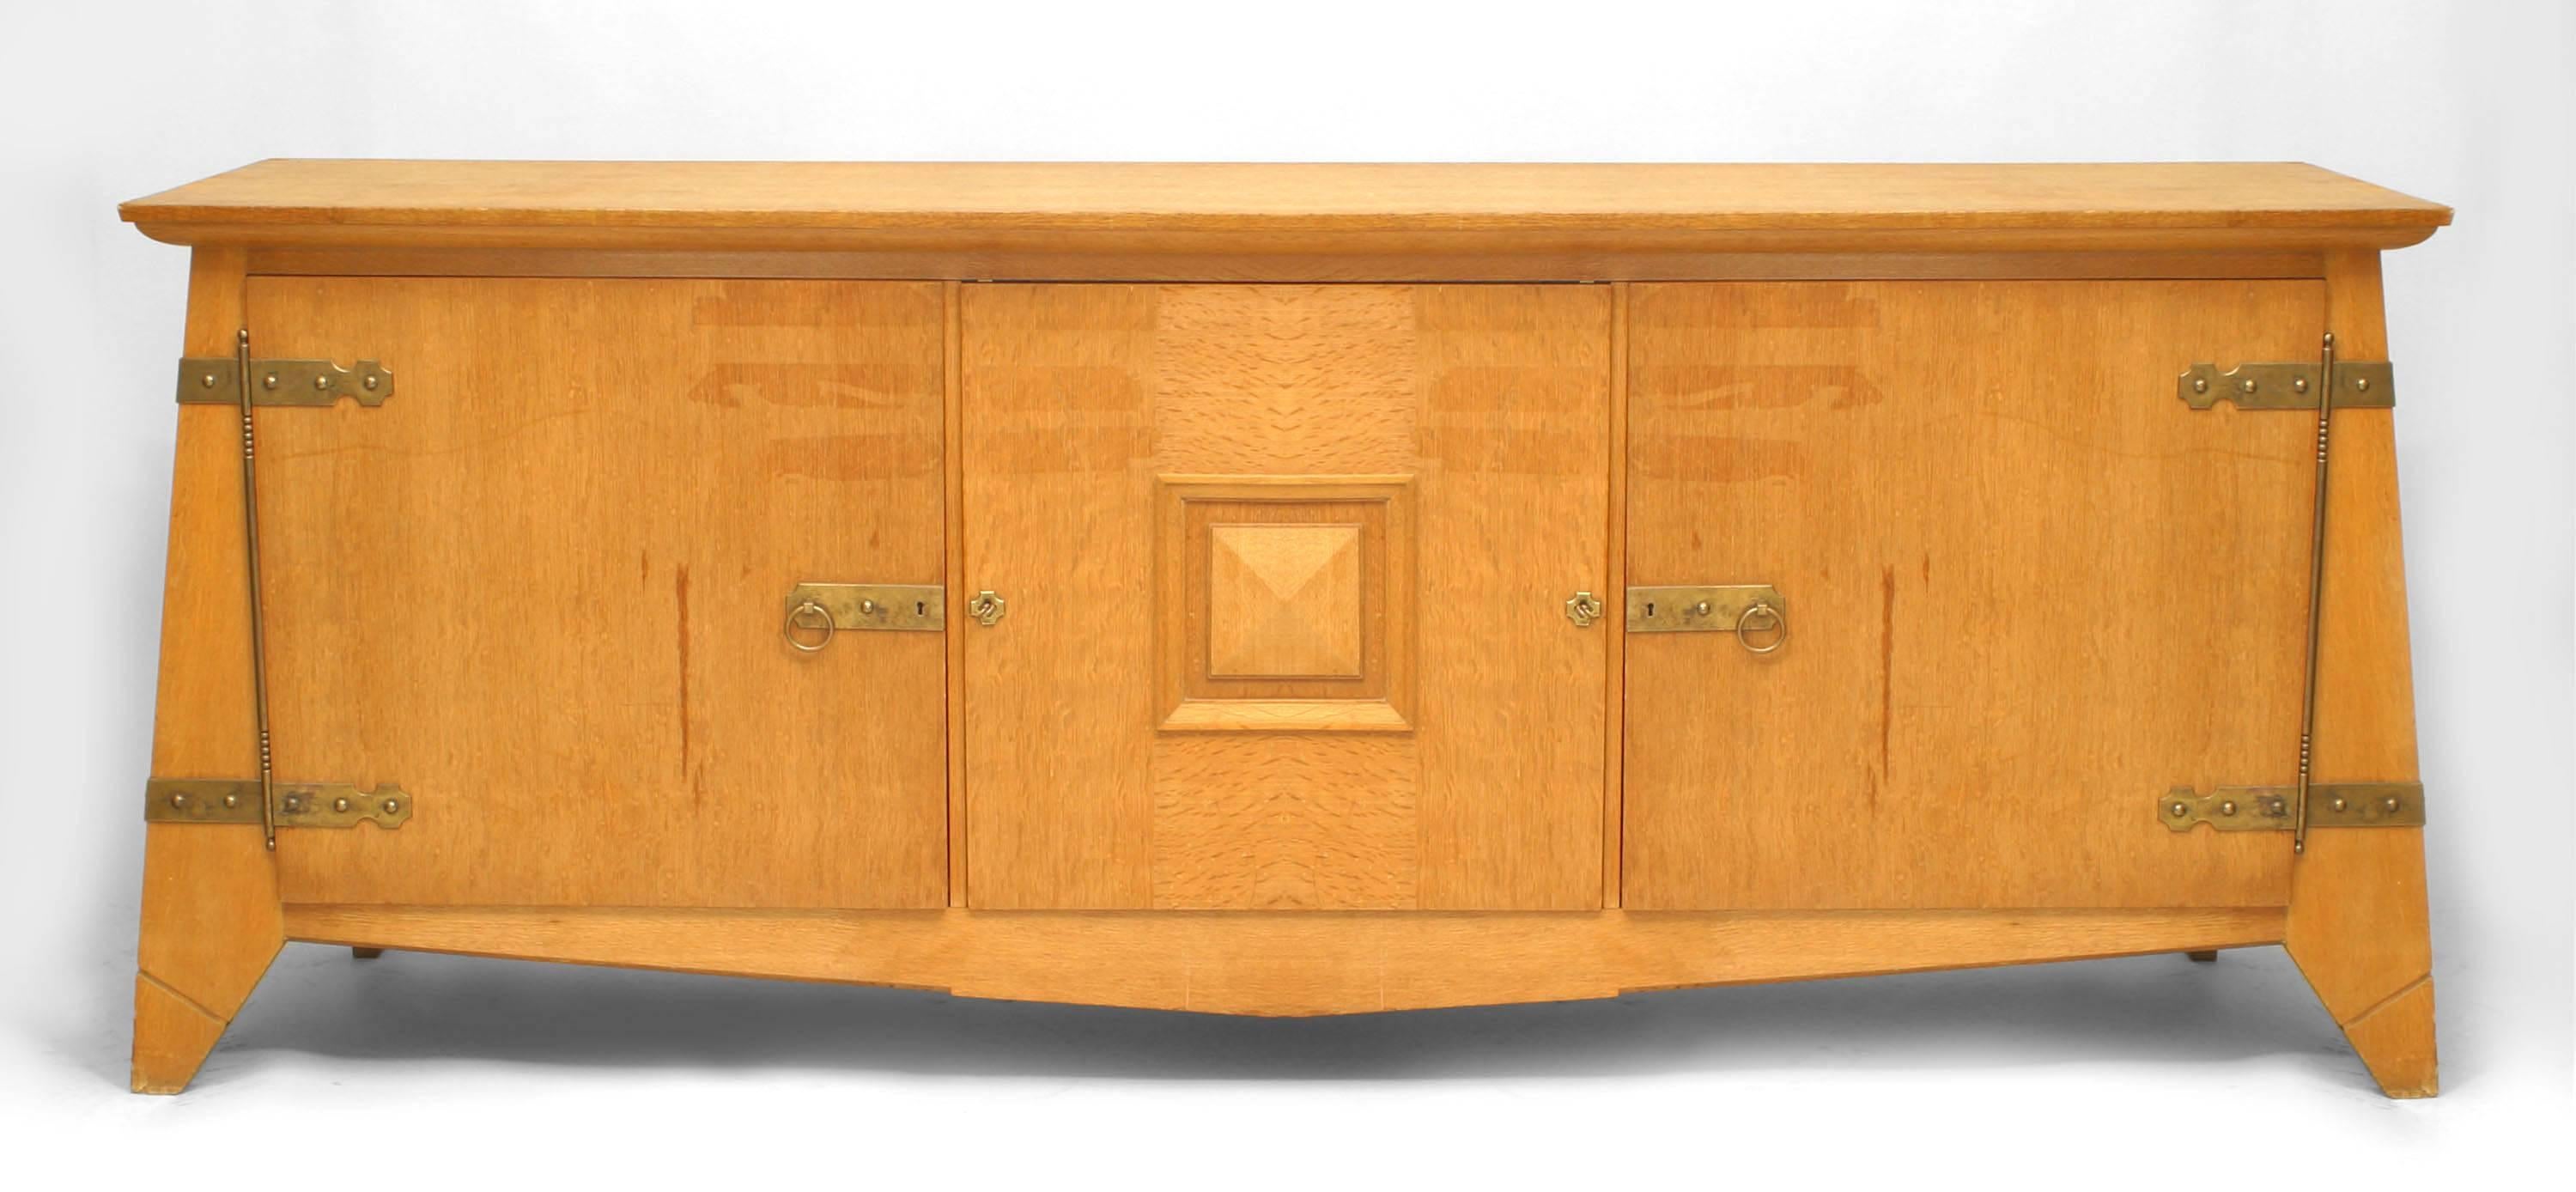 1940's French oak sideboard with three doors and brass hardware on splayed feet.